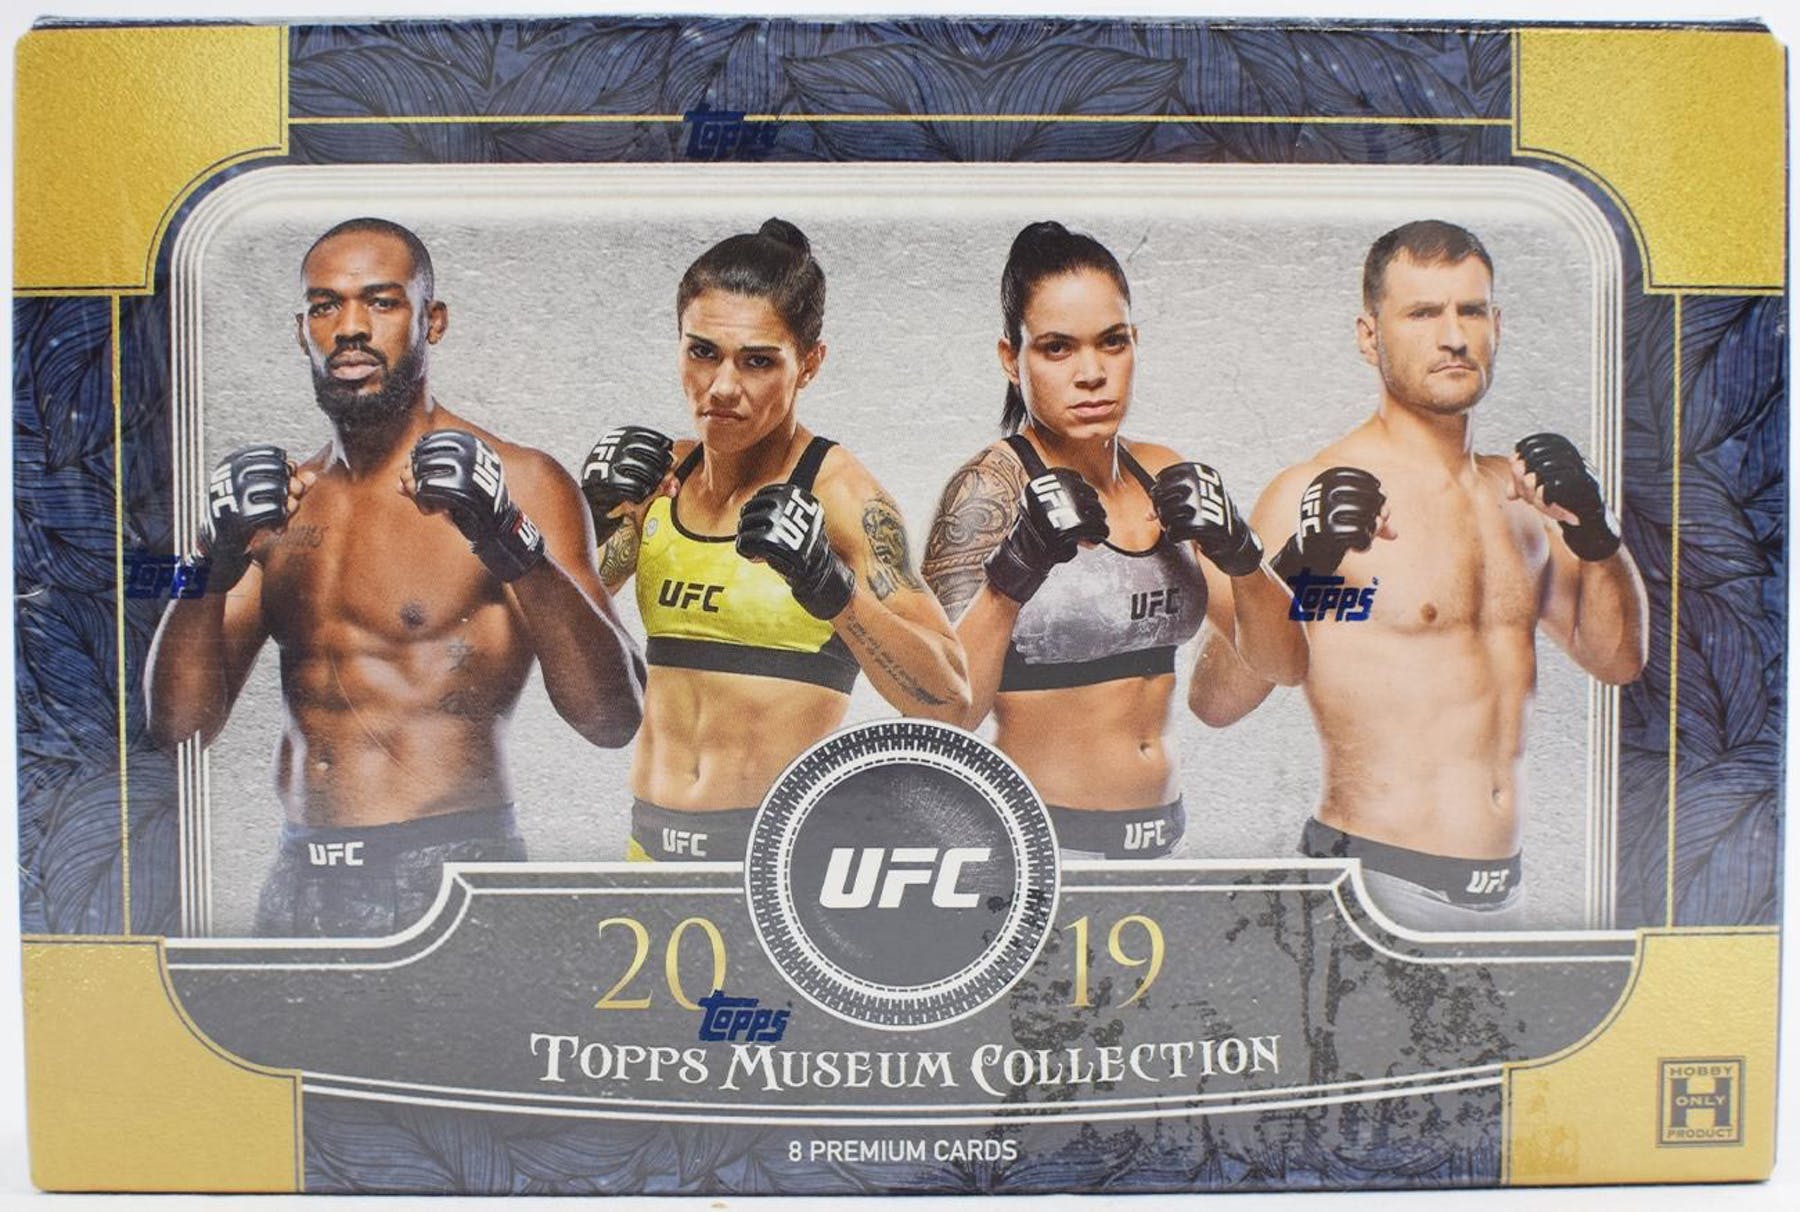 2019 Topps UFC Museum Collection Hobby Box - BigBoi Cards